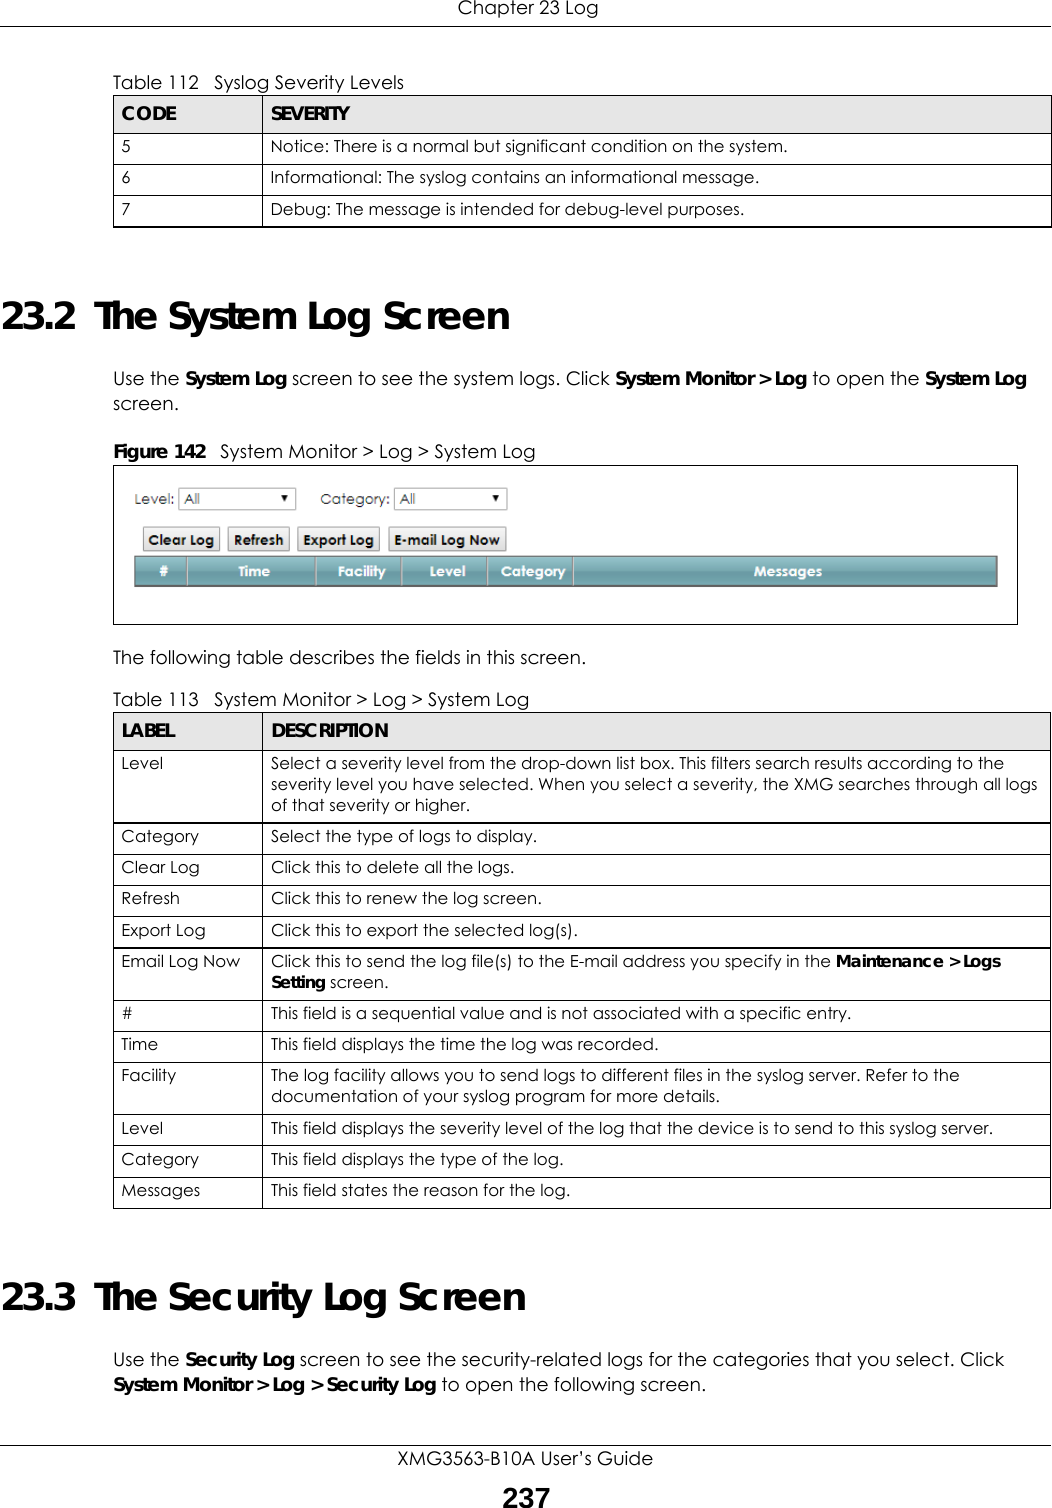  Chapter 23 LogXMG3563-B10A User’s Guide23723.2  The System Log Screen Use the System Log screen to see the system logs. Click System Monitor &gt; Log to open the System Log screen. Figure 142   System Monitor &gt; Log &gt; System LogThe following table describes the fields in this screen.   23.3  The Security Log ScreenUse the Security Log screen to see the security-related logs for the categories that you select. Click System Monitor &gt; Log &gt; Security Log to open the following screen. 5 Notice: There is a normal but significant condition on the system.6 Informational: The syslog contains an informational message.7 Debug: The message is intended for debug-level purposes.Table 112   Syslog Severity LevelsCODE SEVERITYTable 113   System Monitor &gt; Log &gt; System LogLABEL DESCRIPTIONLevel Select a severity level from the drop-down list box. This filters search results according to the severity level you have selected. When you select a severity, the XMG searches through all logs of that severity or higher. Category Select the type of logs to display.Clear Log  Click this to delete all the logs. Refresh Click this to renew the log screen. Export Log Click this to export the selected log(s).Email Log Now Click this to send the log file(s) to the E-mail address you specify in the Maintenance &gt; Logs Setting screen.#This field is a sequential value and is not associated with a specific entry.Time  This field displays the time the log was recorded. Facility  The log facility allows you to send logs to different files in the syslog server. Refer to the documentation of your syslog program for more details.Level This field displays the severity level of the log that the device is to send to this syslog server.Category This field displays the type of the log.Messages This field states the reason for the log.